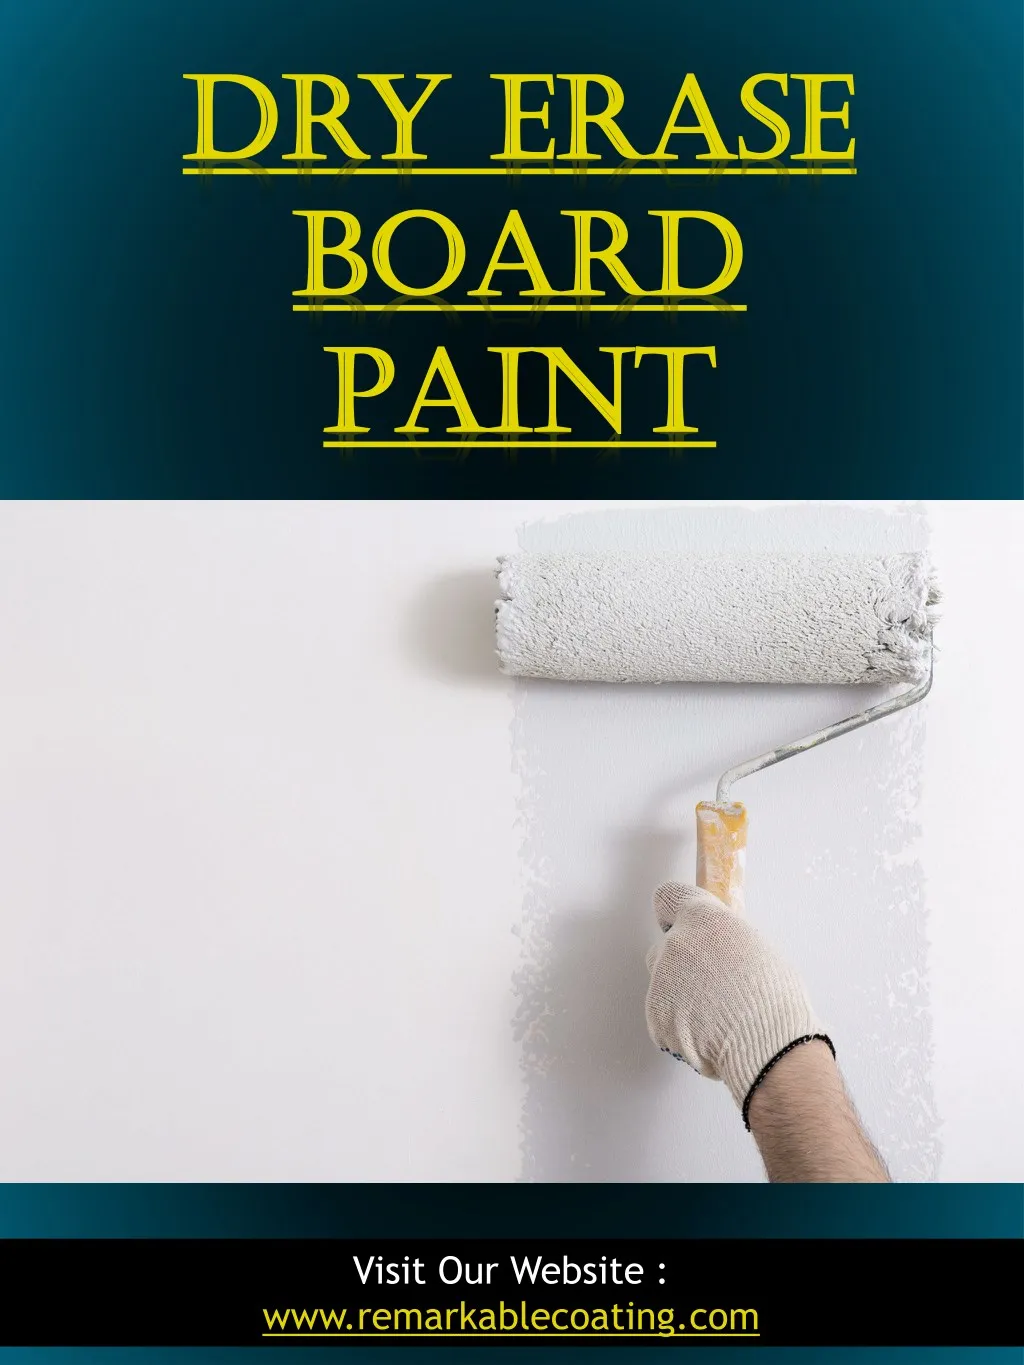 dry erase dry erase board board paint paint